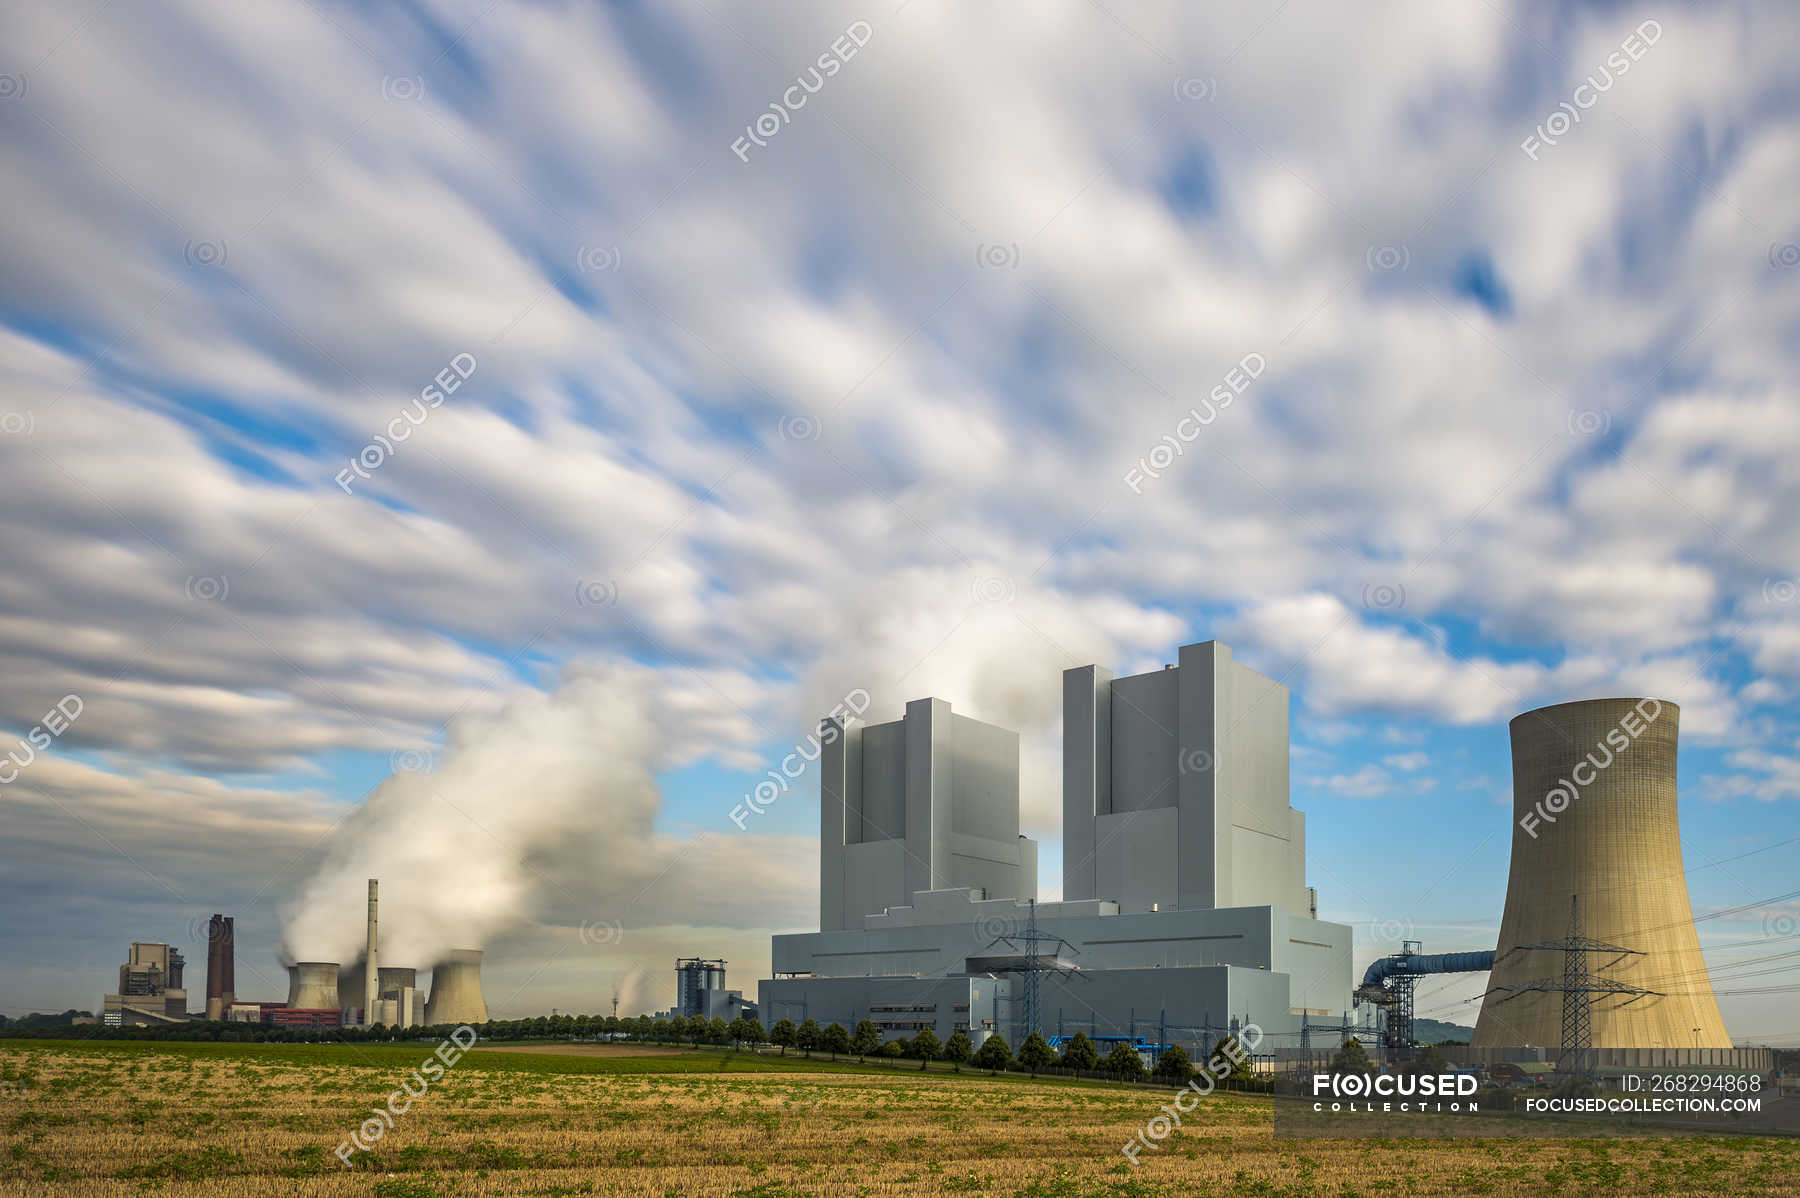 Germany, Grevenbroich-Neurath, old and new Neurath Power — energy supply, outdoors Stock Photo | #268294868